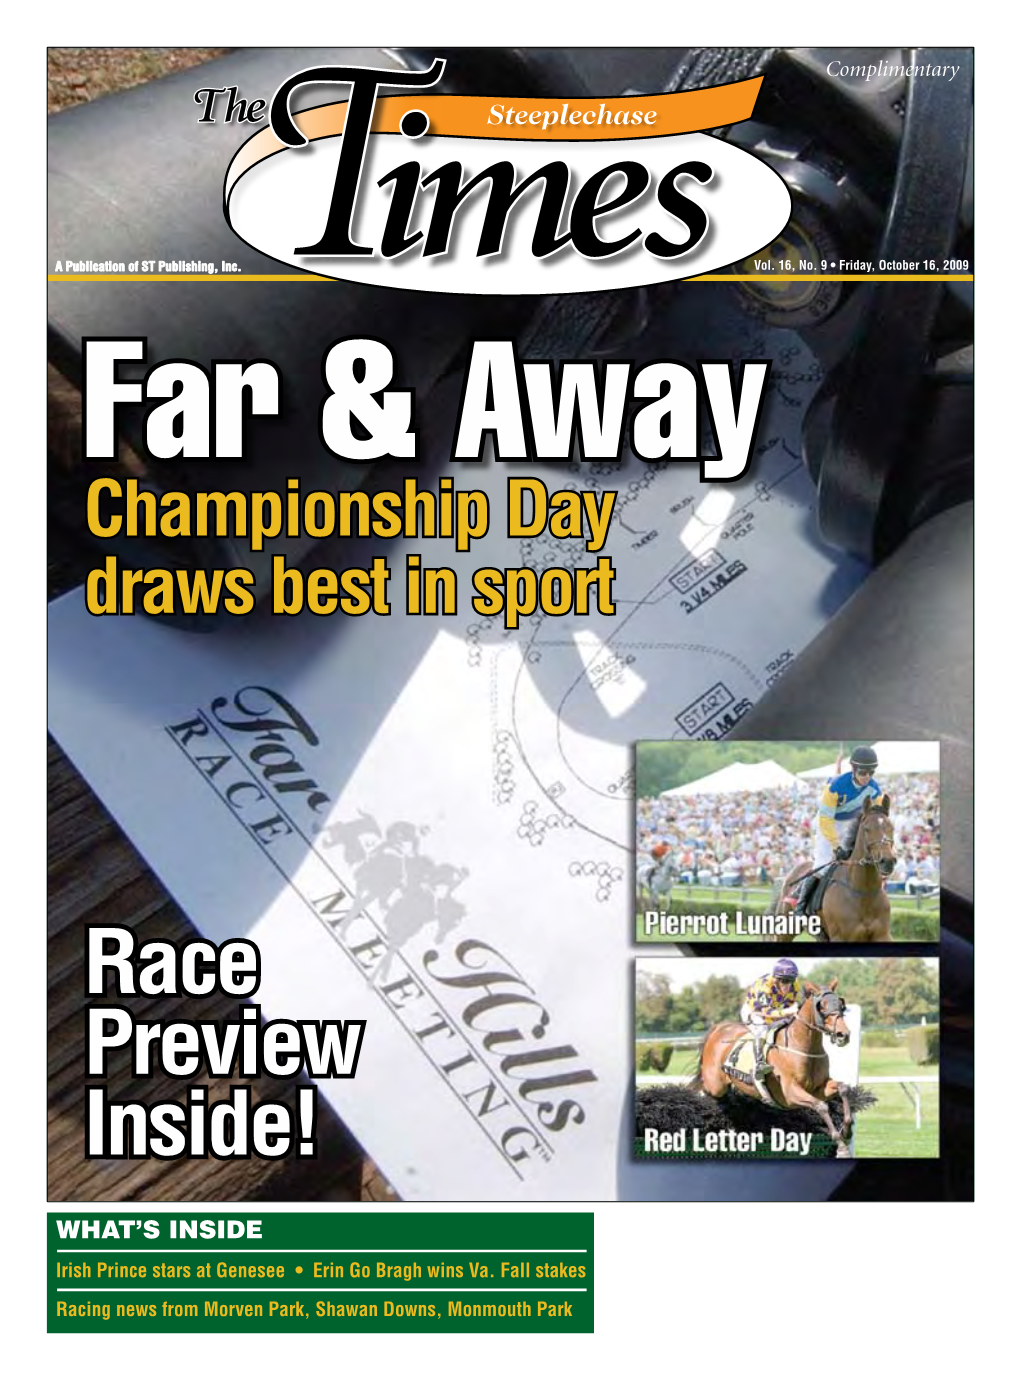 Race Preview Inside!